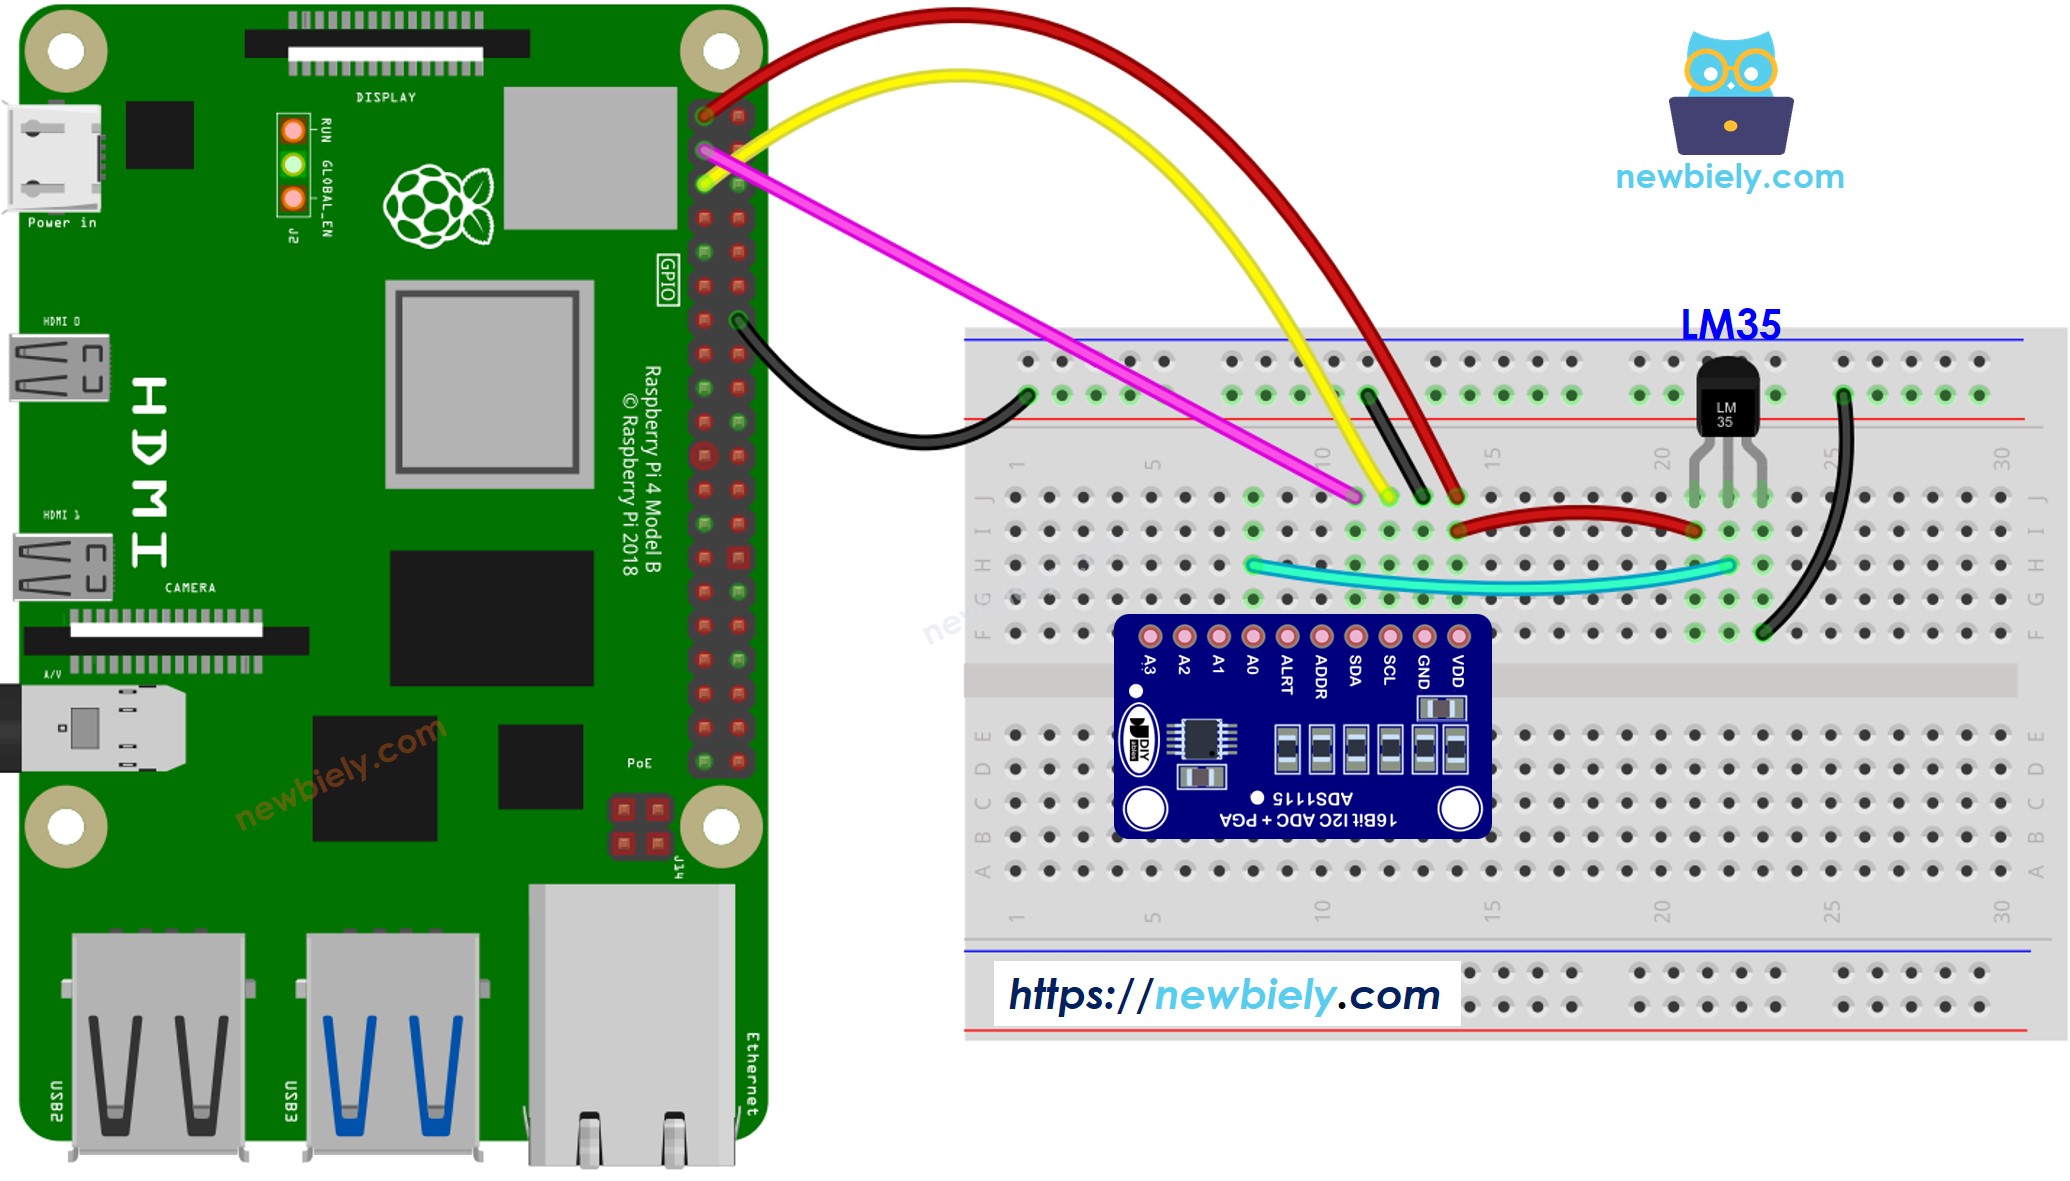 The wiring diagram between Raspberry Pi and LM35 temperature sensor